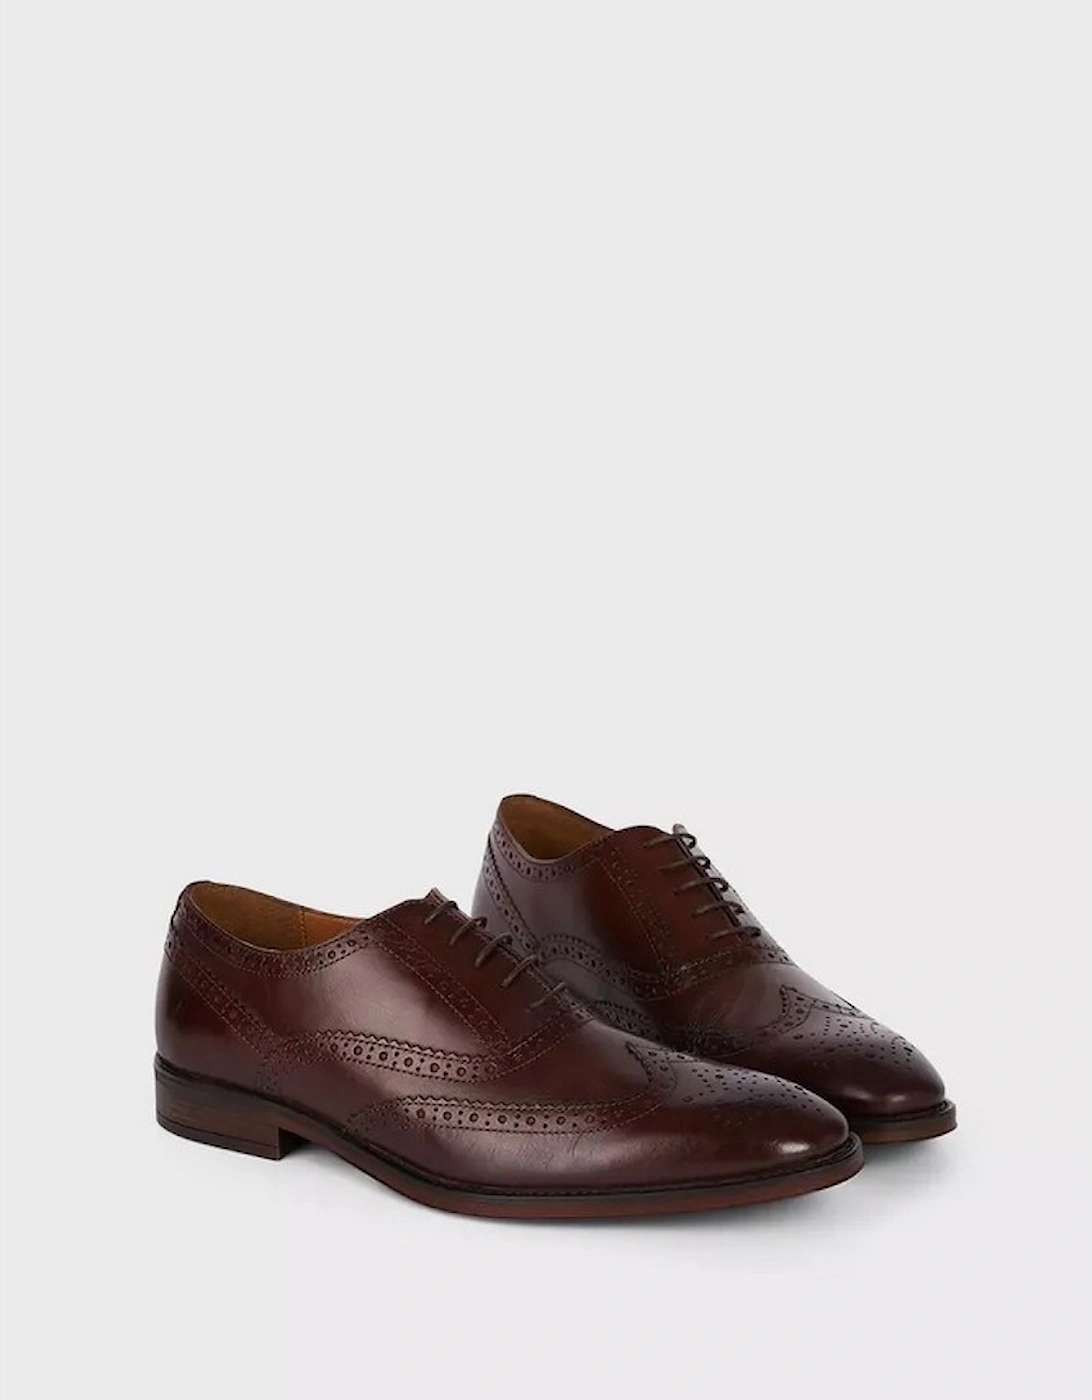 Mens Oxford Leather Brogues